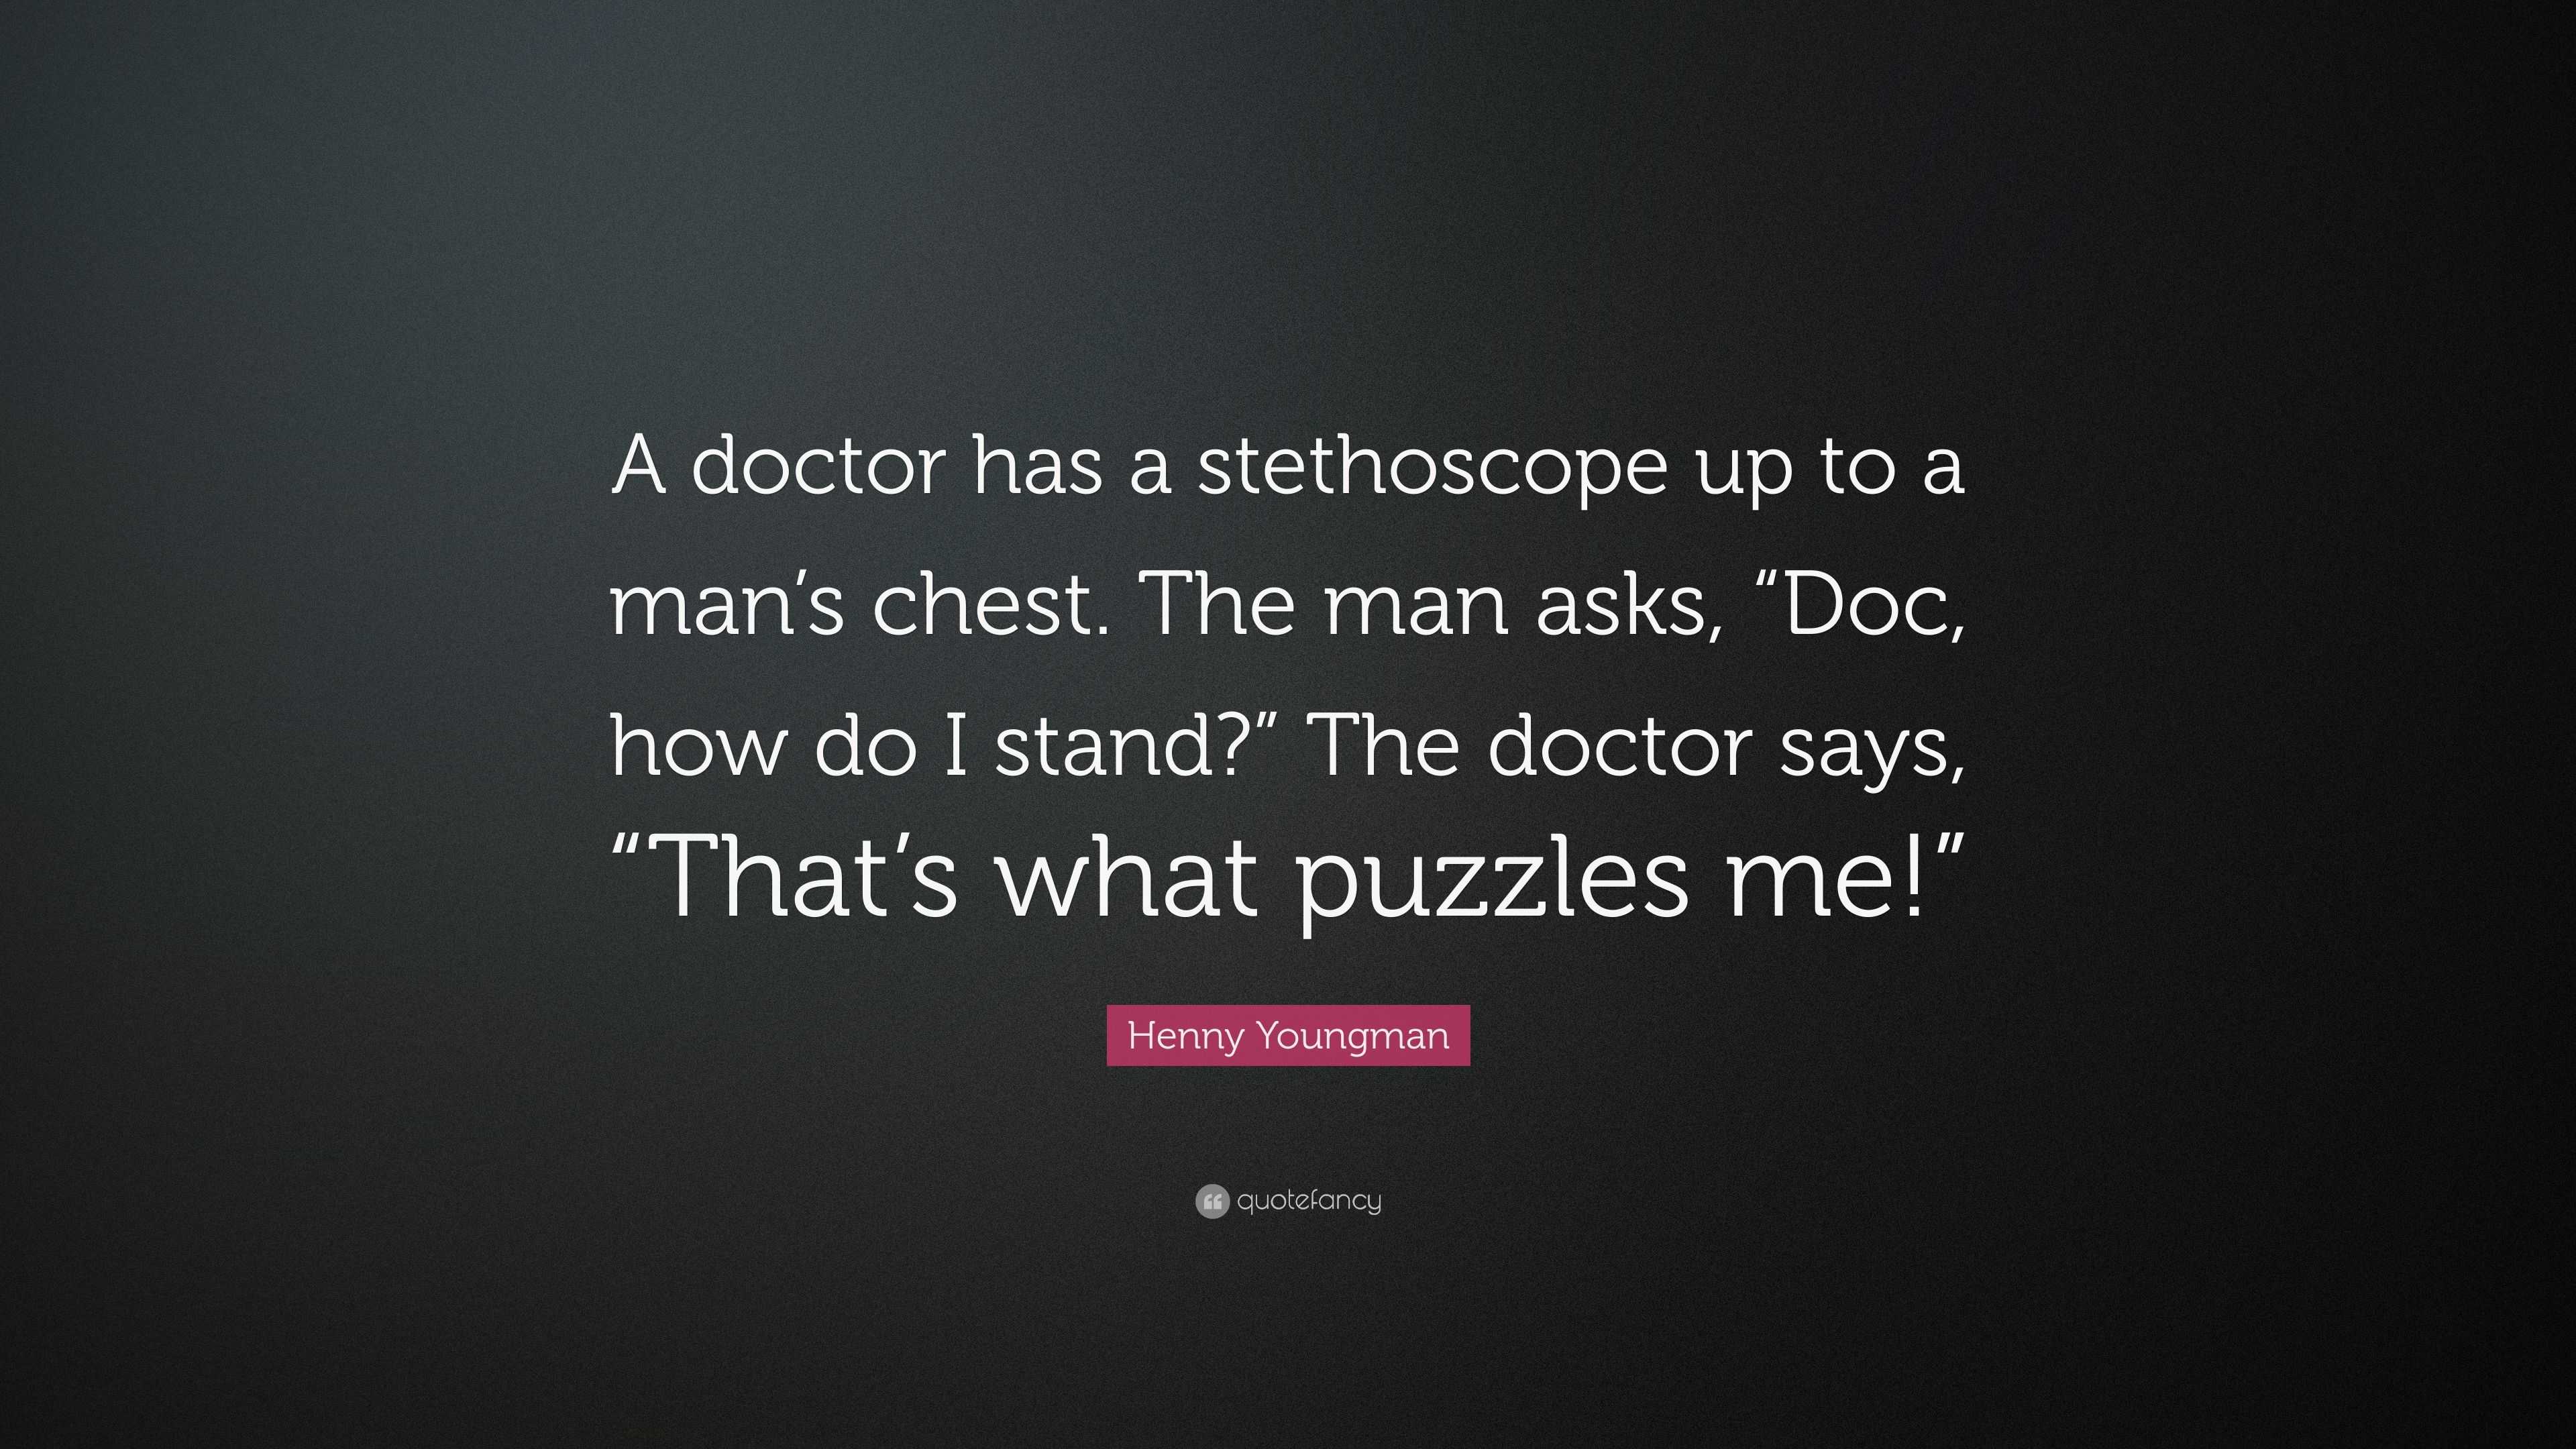 Henny Youngman Quote: “A doctor has a stethoscope up to a man's chest. The  man asks, “Doc, how do I stand?” The doctor says, “That's what puzzl...”